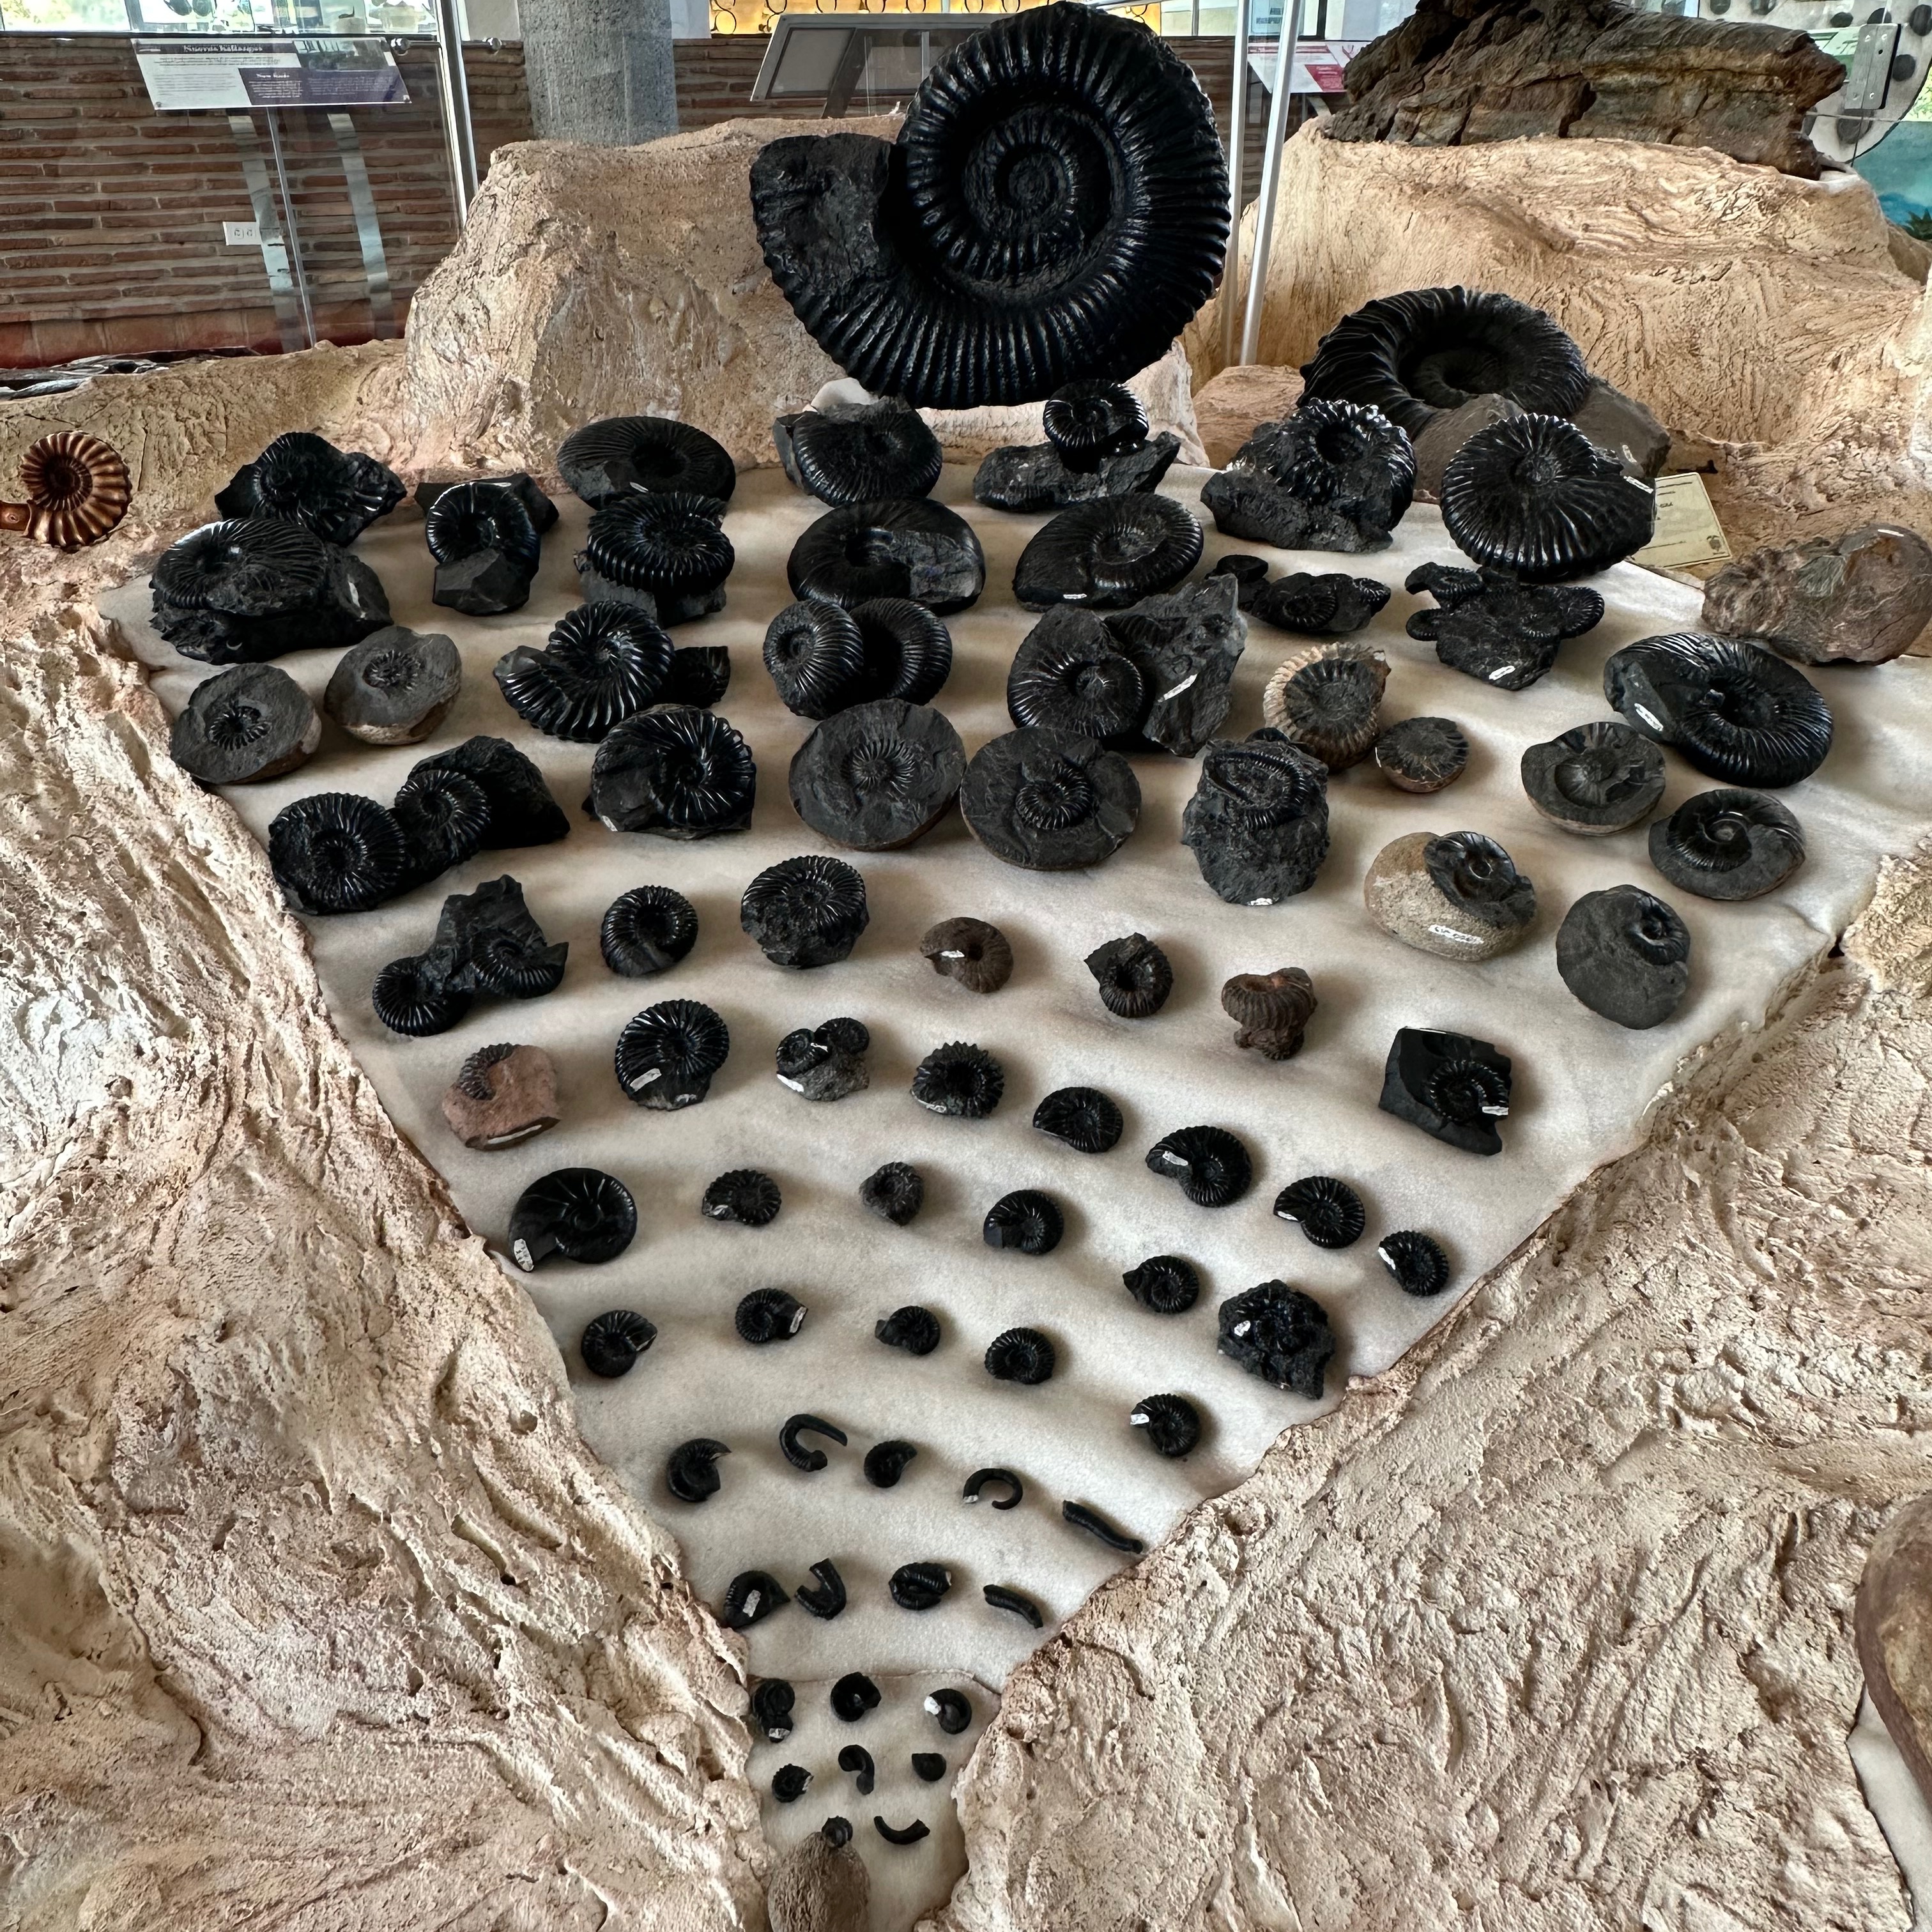 A collection of at least 50 fossilized ammonite spiral shells on display.